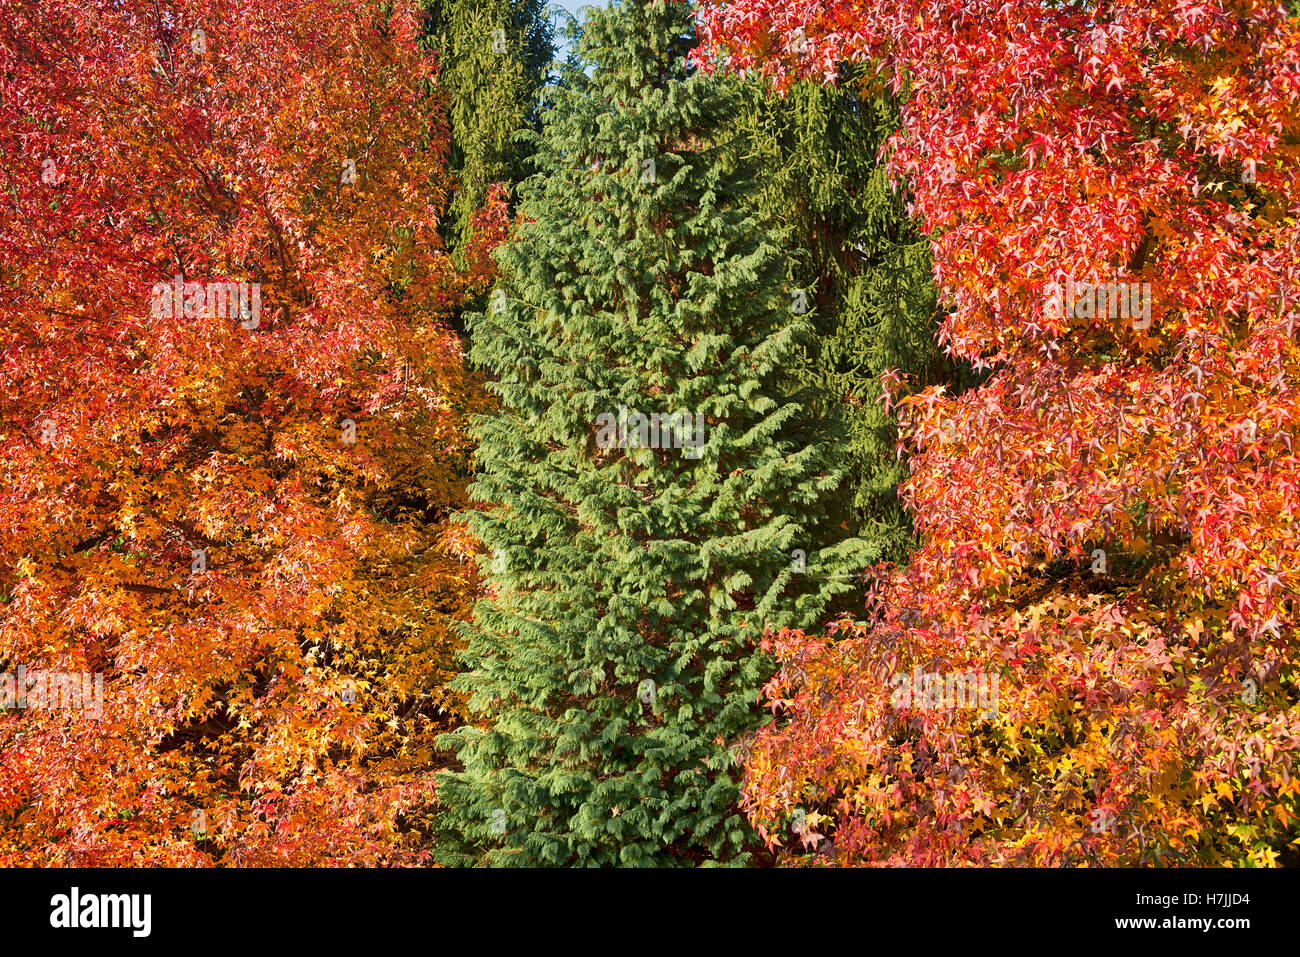 An evergreen tree in the midst of others with autumn colors Stock Photo